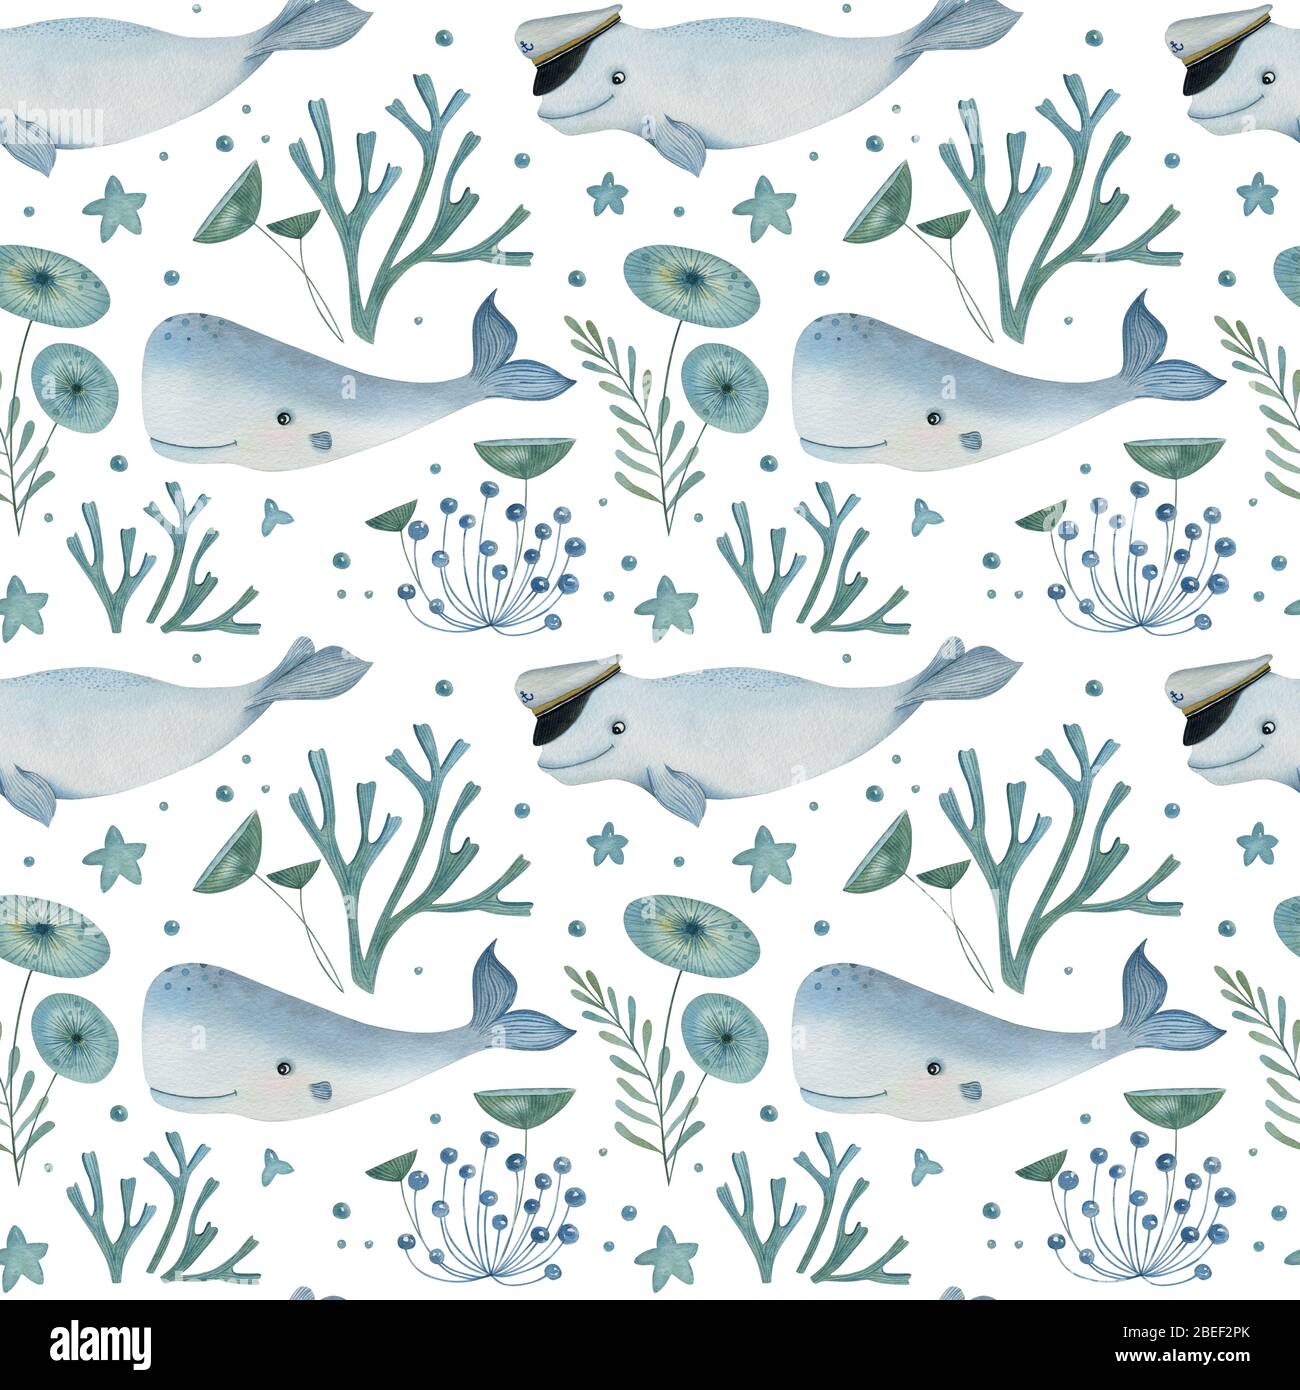 Watercolor seamless pattern with Arctic cachalots and beluga with decorative plant elements on the white background. Funny kids illustration. Stock Photo